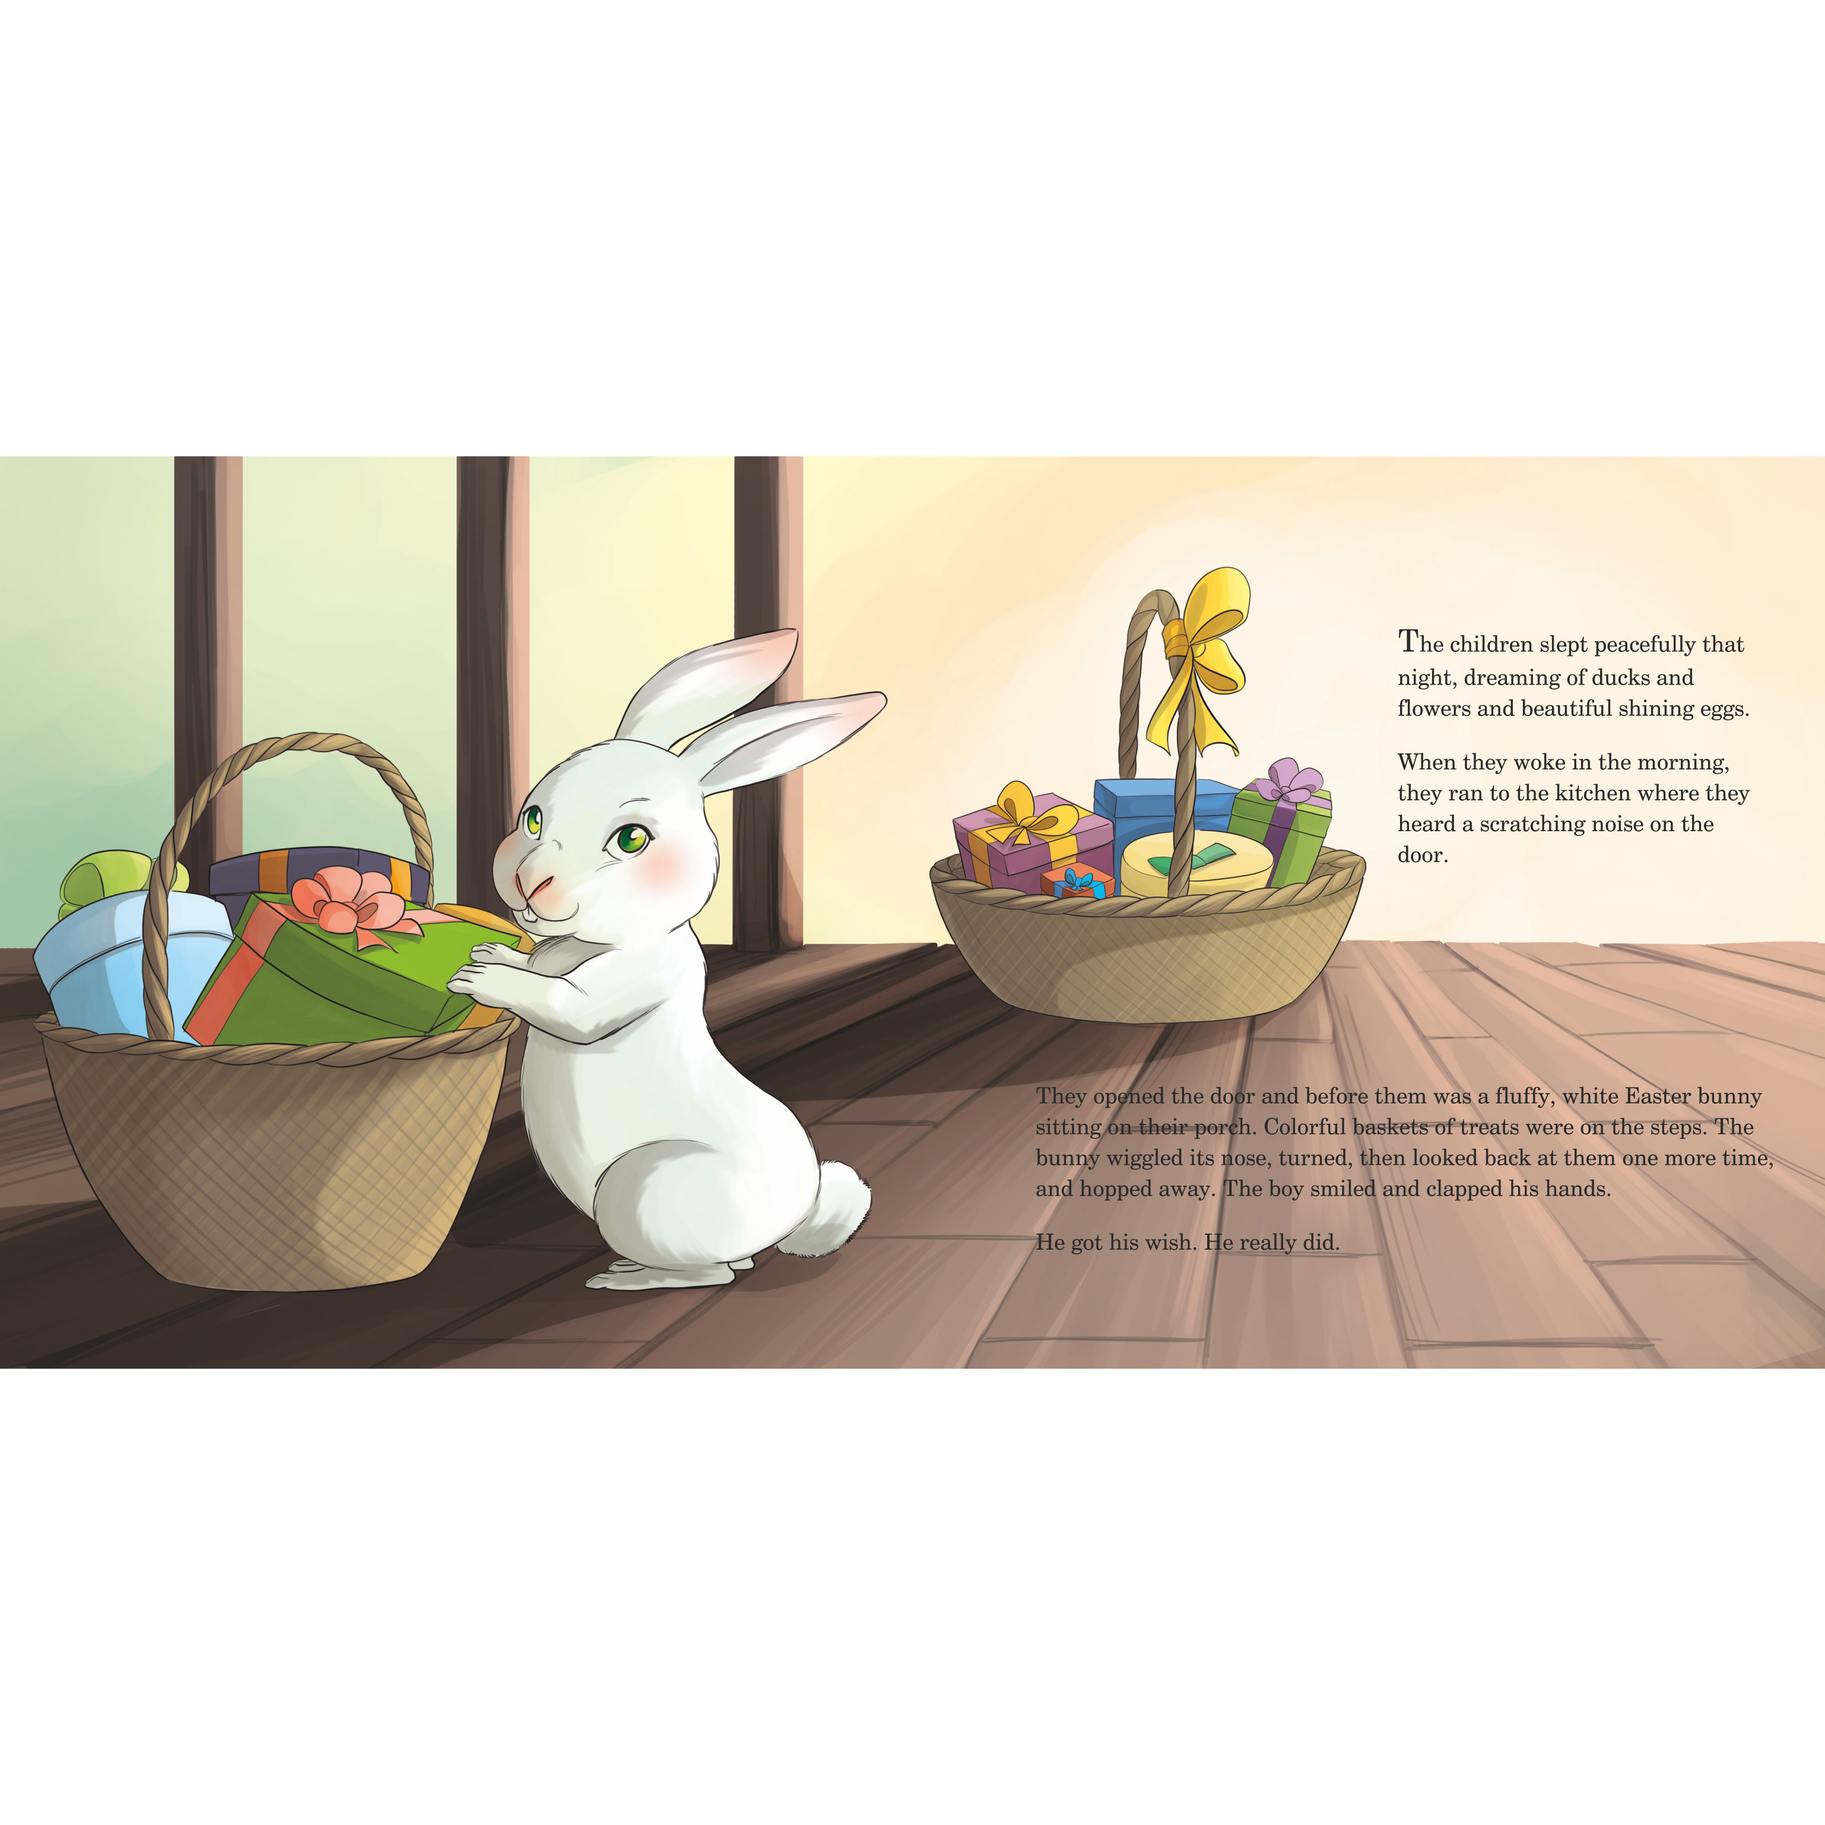 The Magical Tale of Easter Bunny Dust - An Easter Tradition 4